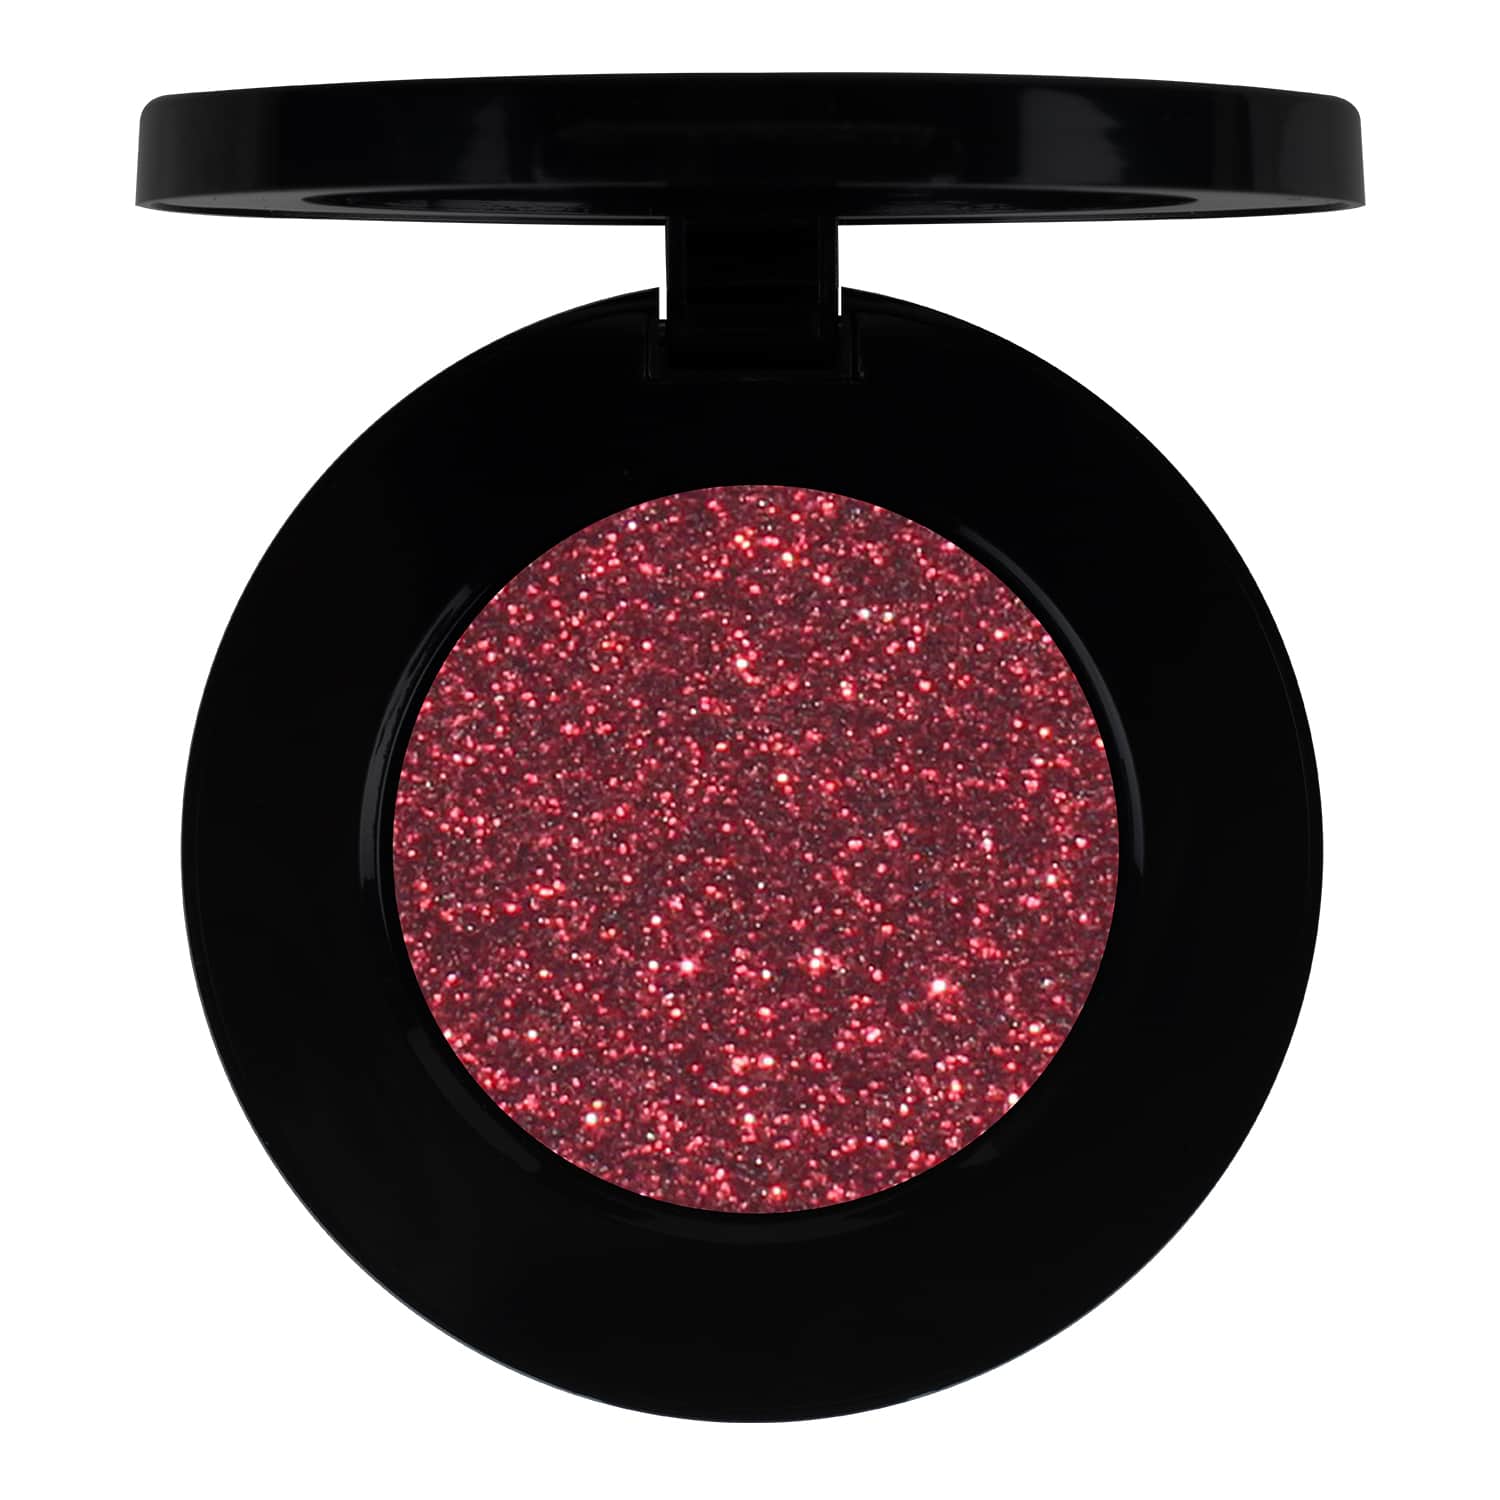 PAC Pressed Glitter Eyeshadow - 48 (Injected) PAC